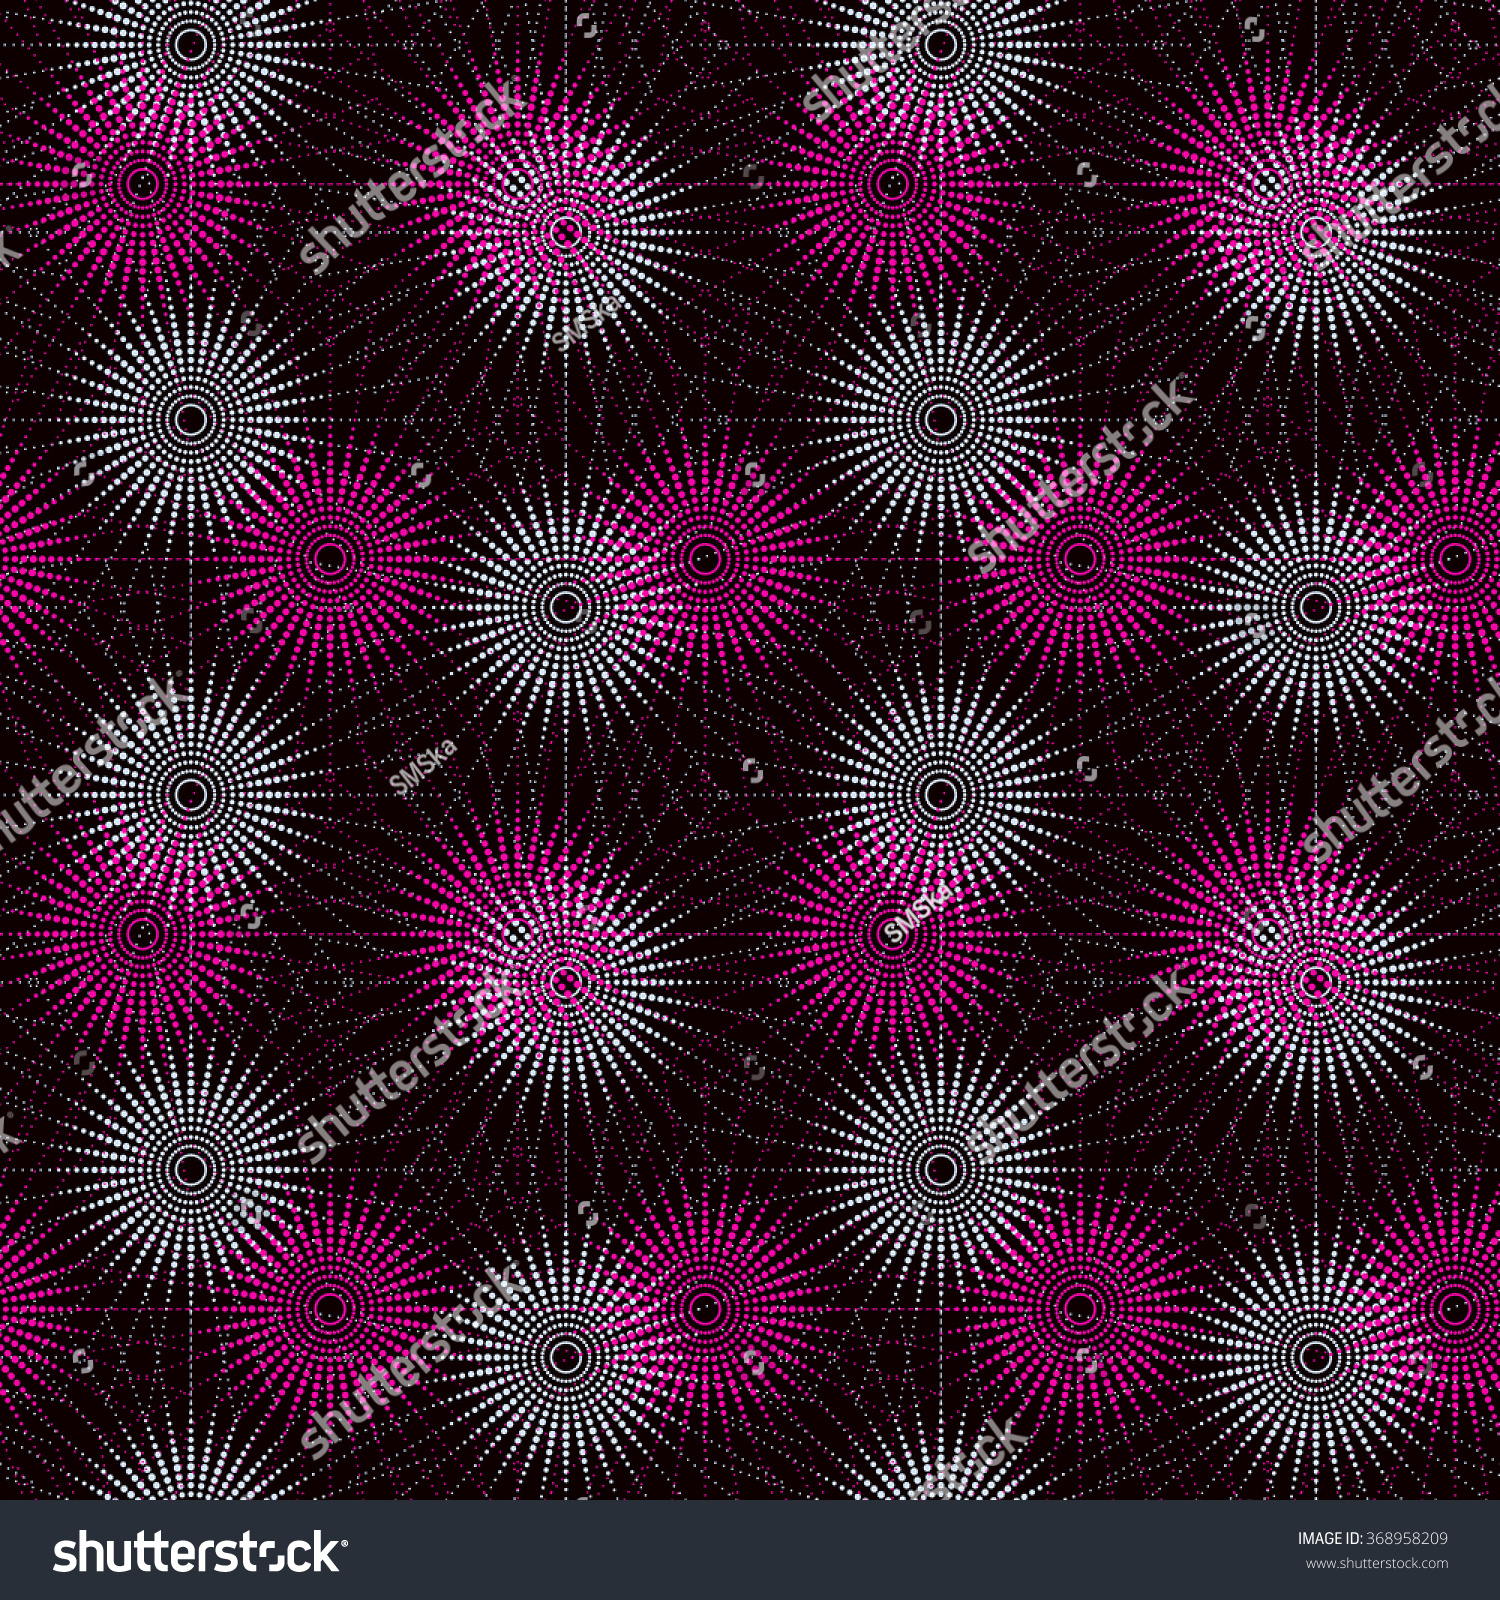 SVG of Vector seamless background with the effect of fireworks-style glitch svg